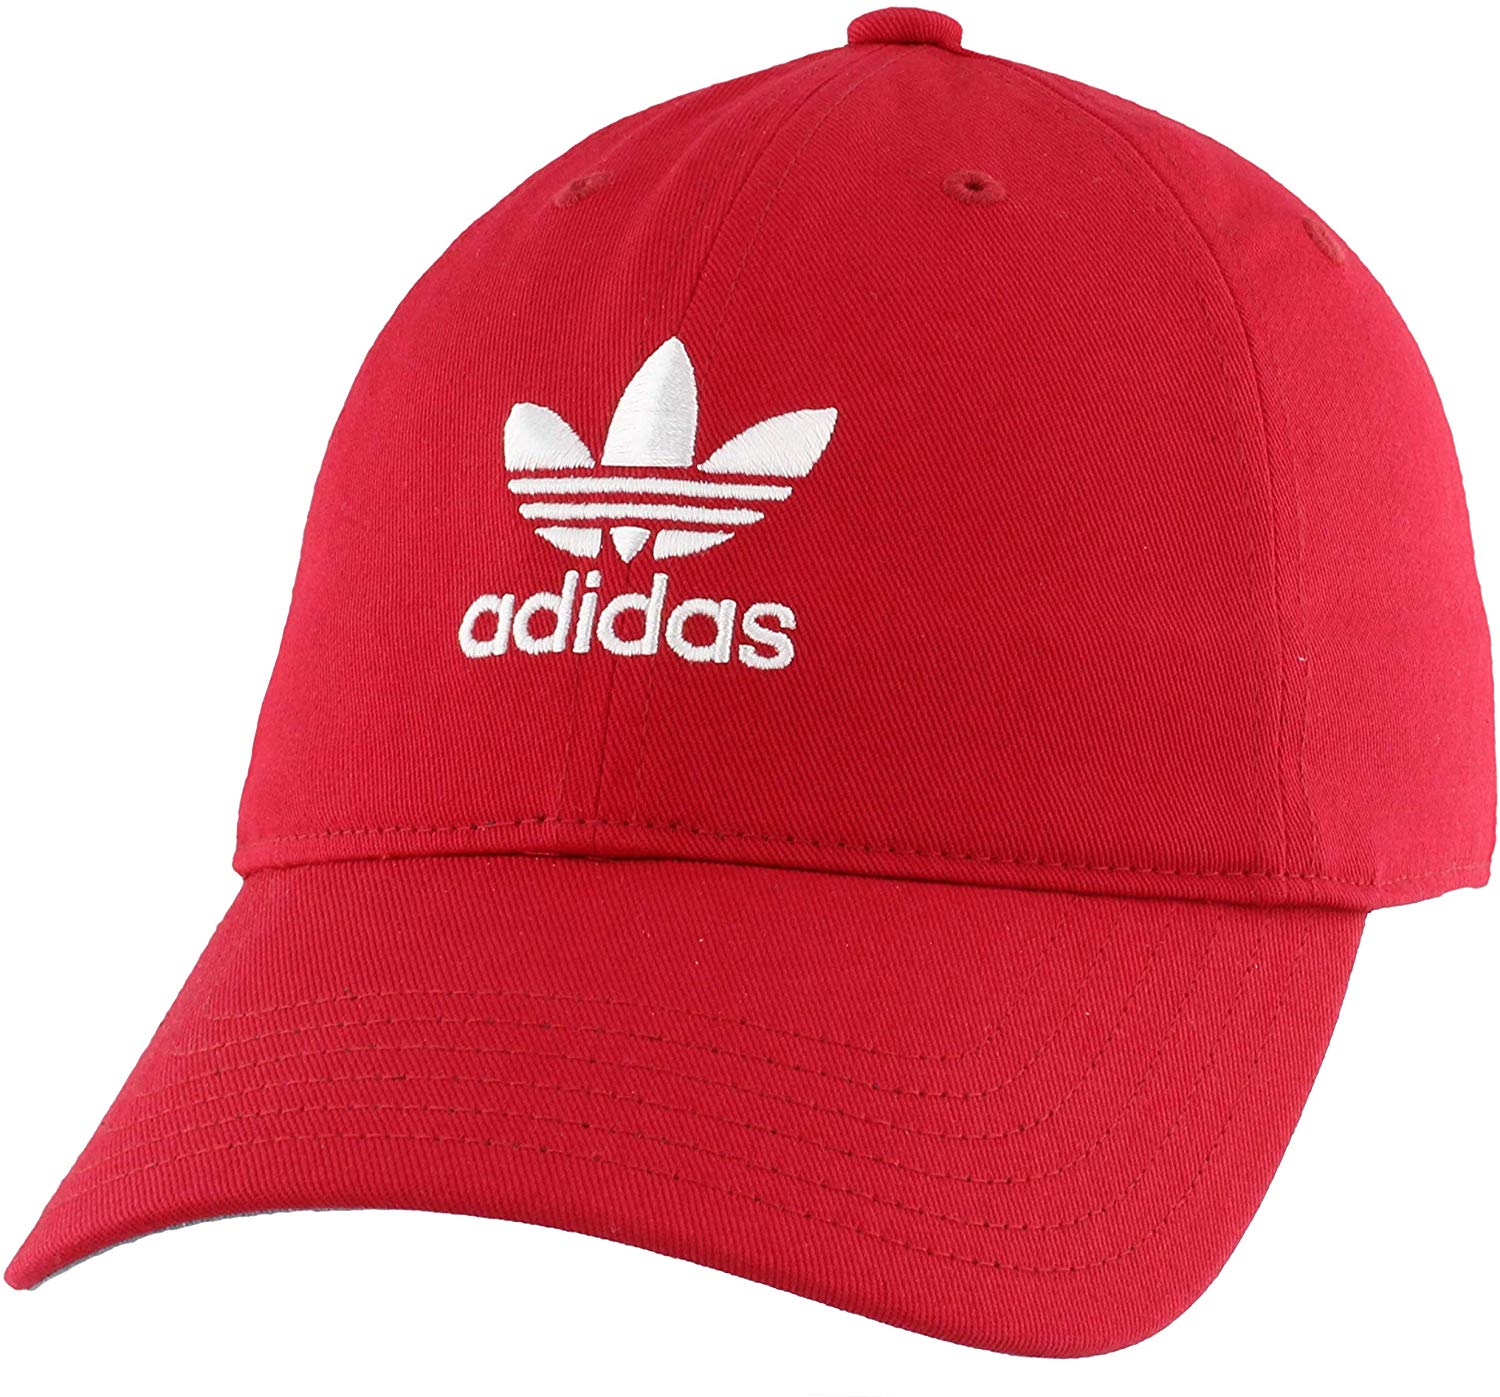 Adidas Womens Relaxed Adjustable Strapback Golf Caps